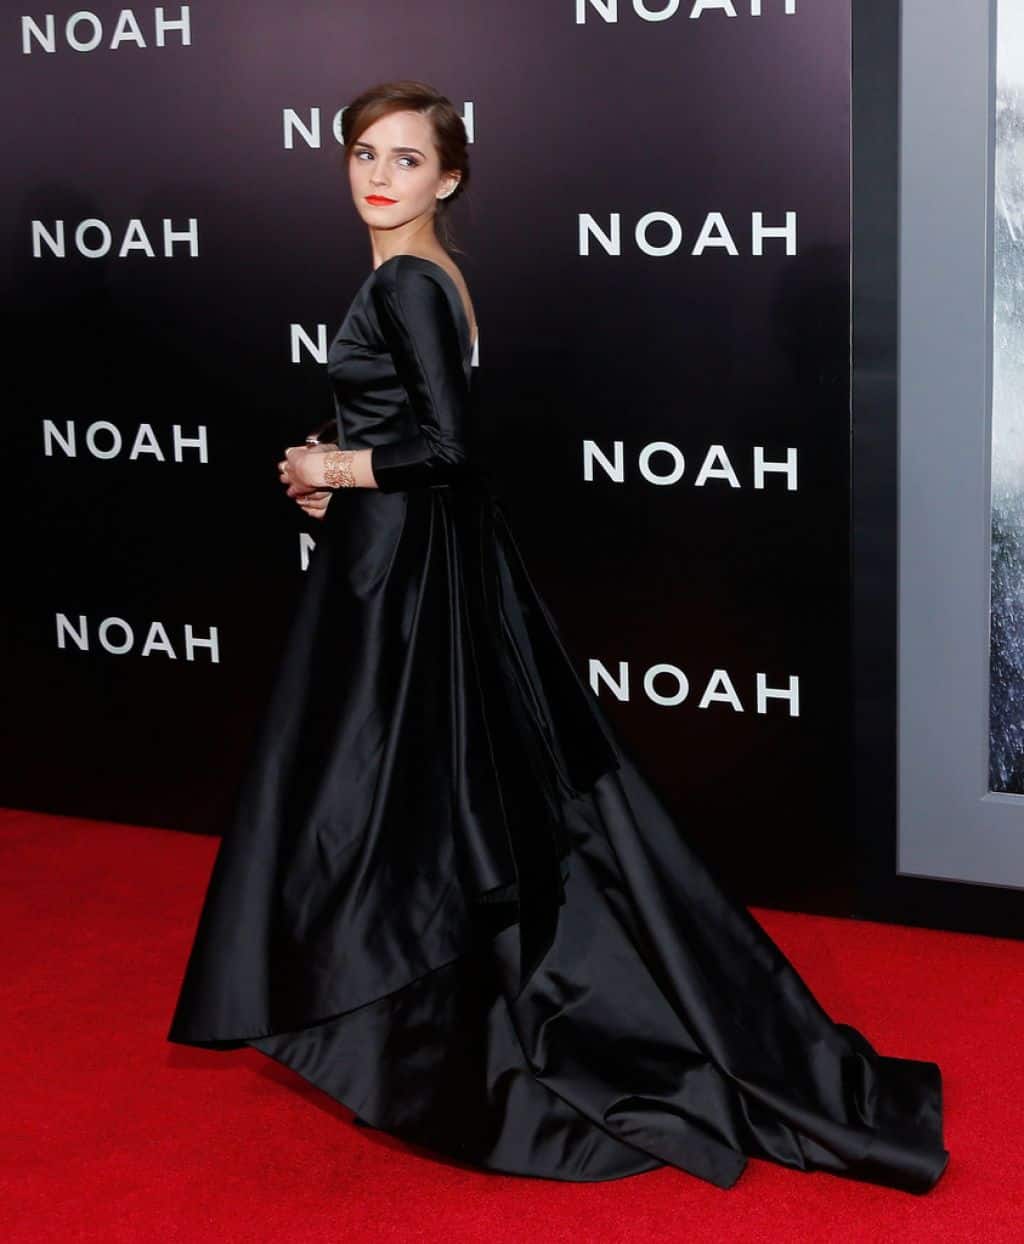 Emma Watson Was a Sensation in a Timeless Gown at the "Noah" Premiere in NY